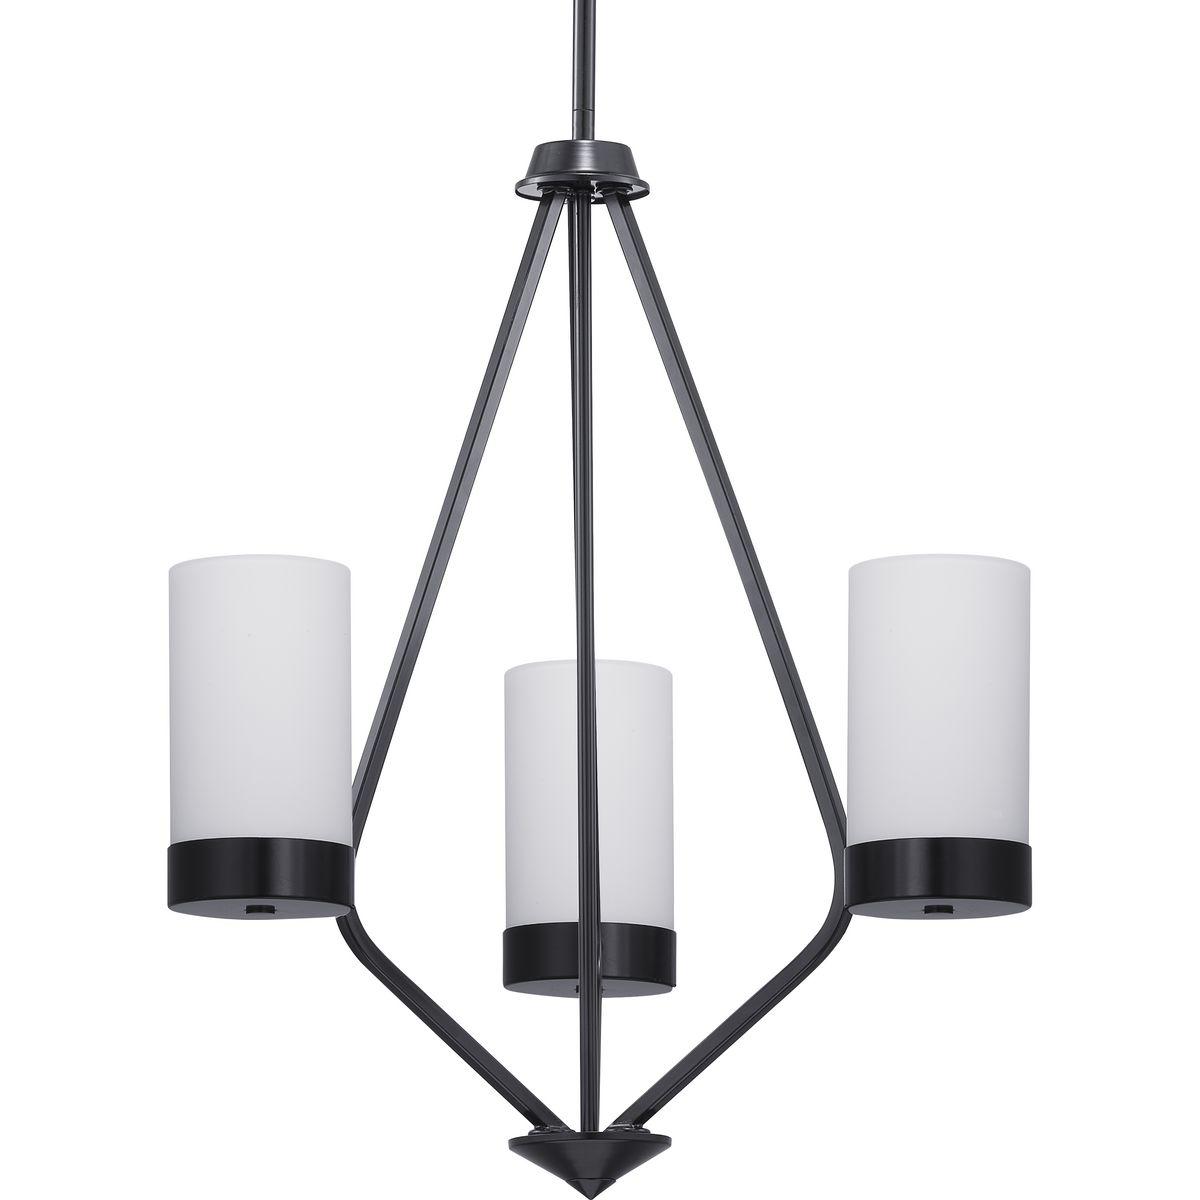 Hubbell P400021-031 Achieve a sleek and modern look with the Elevate Collections three-light chandelier. Etched glass white shades paired with a Matte Black frame provide an elegant contrast for Modern interior design settings. This fixture is part of our Design Series colle